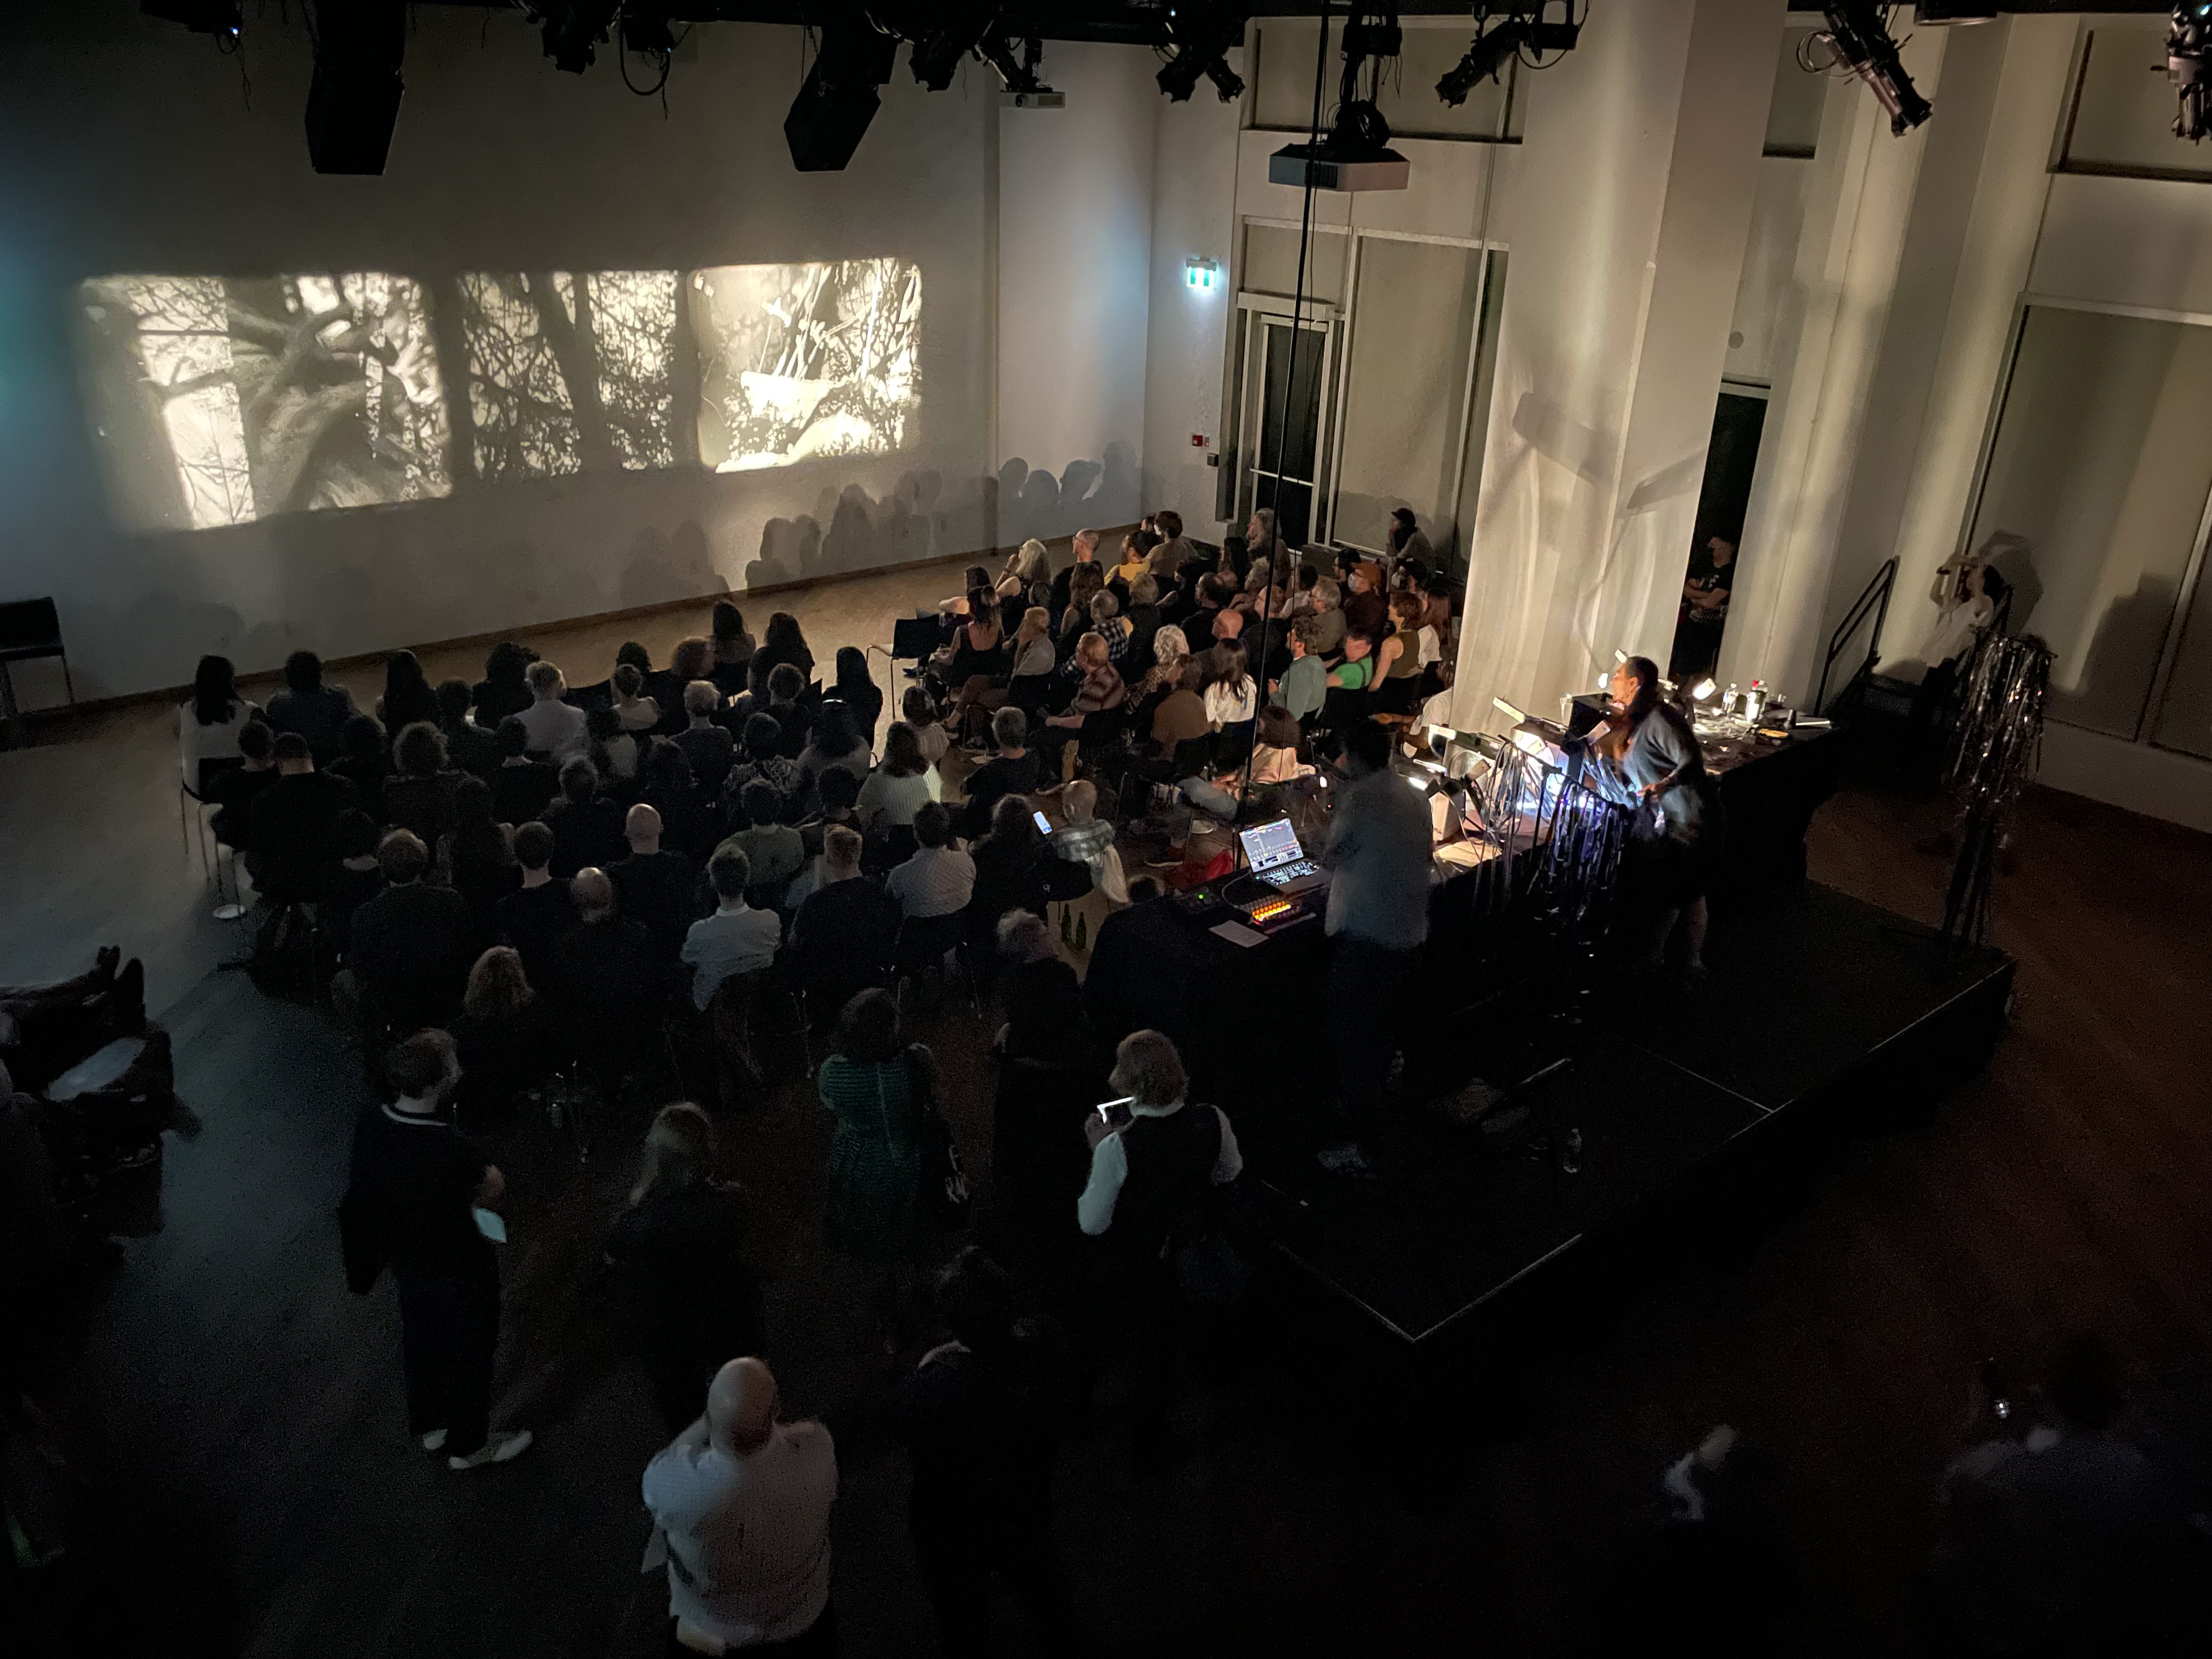 A photograph taken from a high angle of a dark venue space with lots of people sitting in a grid of chairs watching an analog film projection.